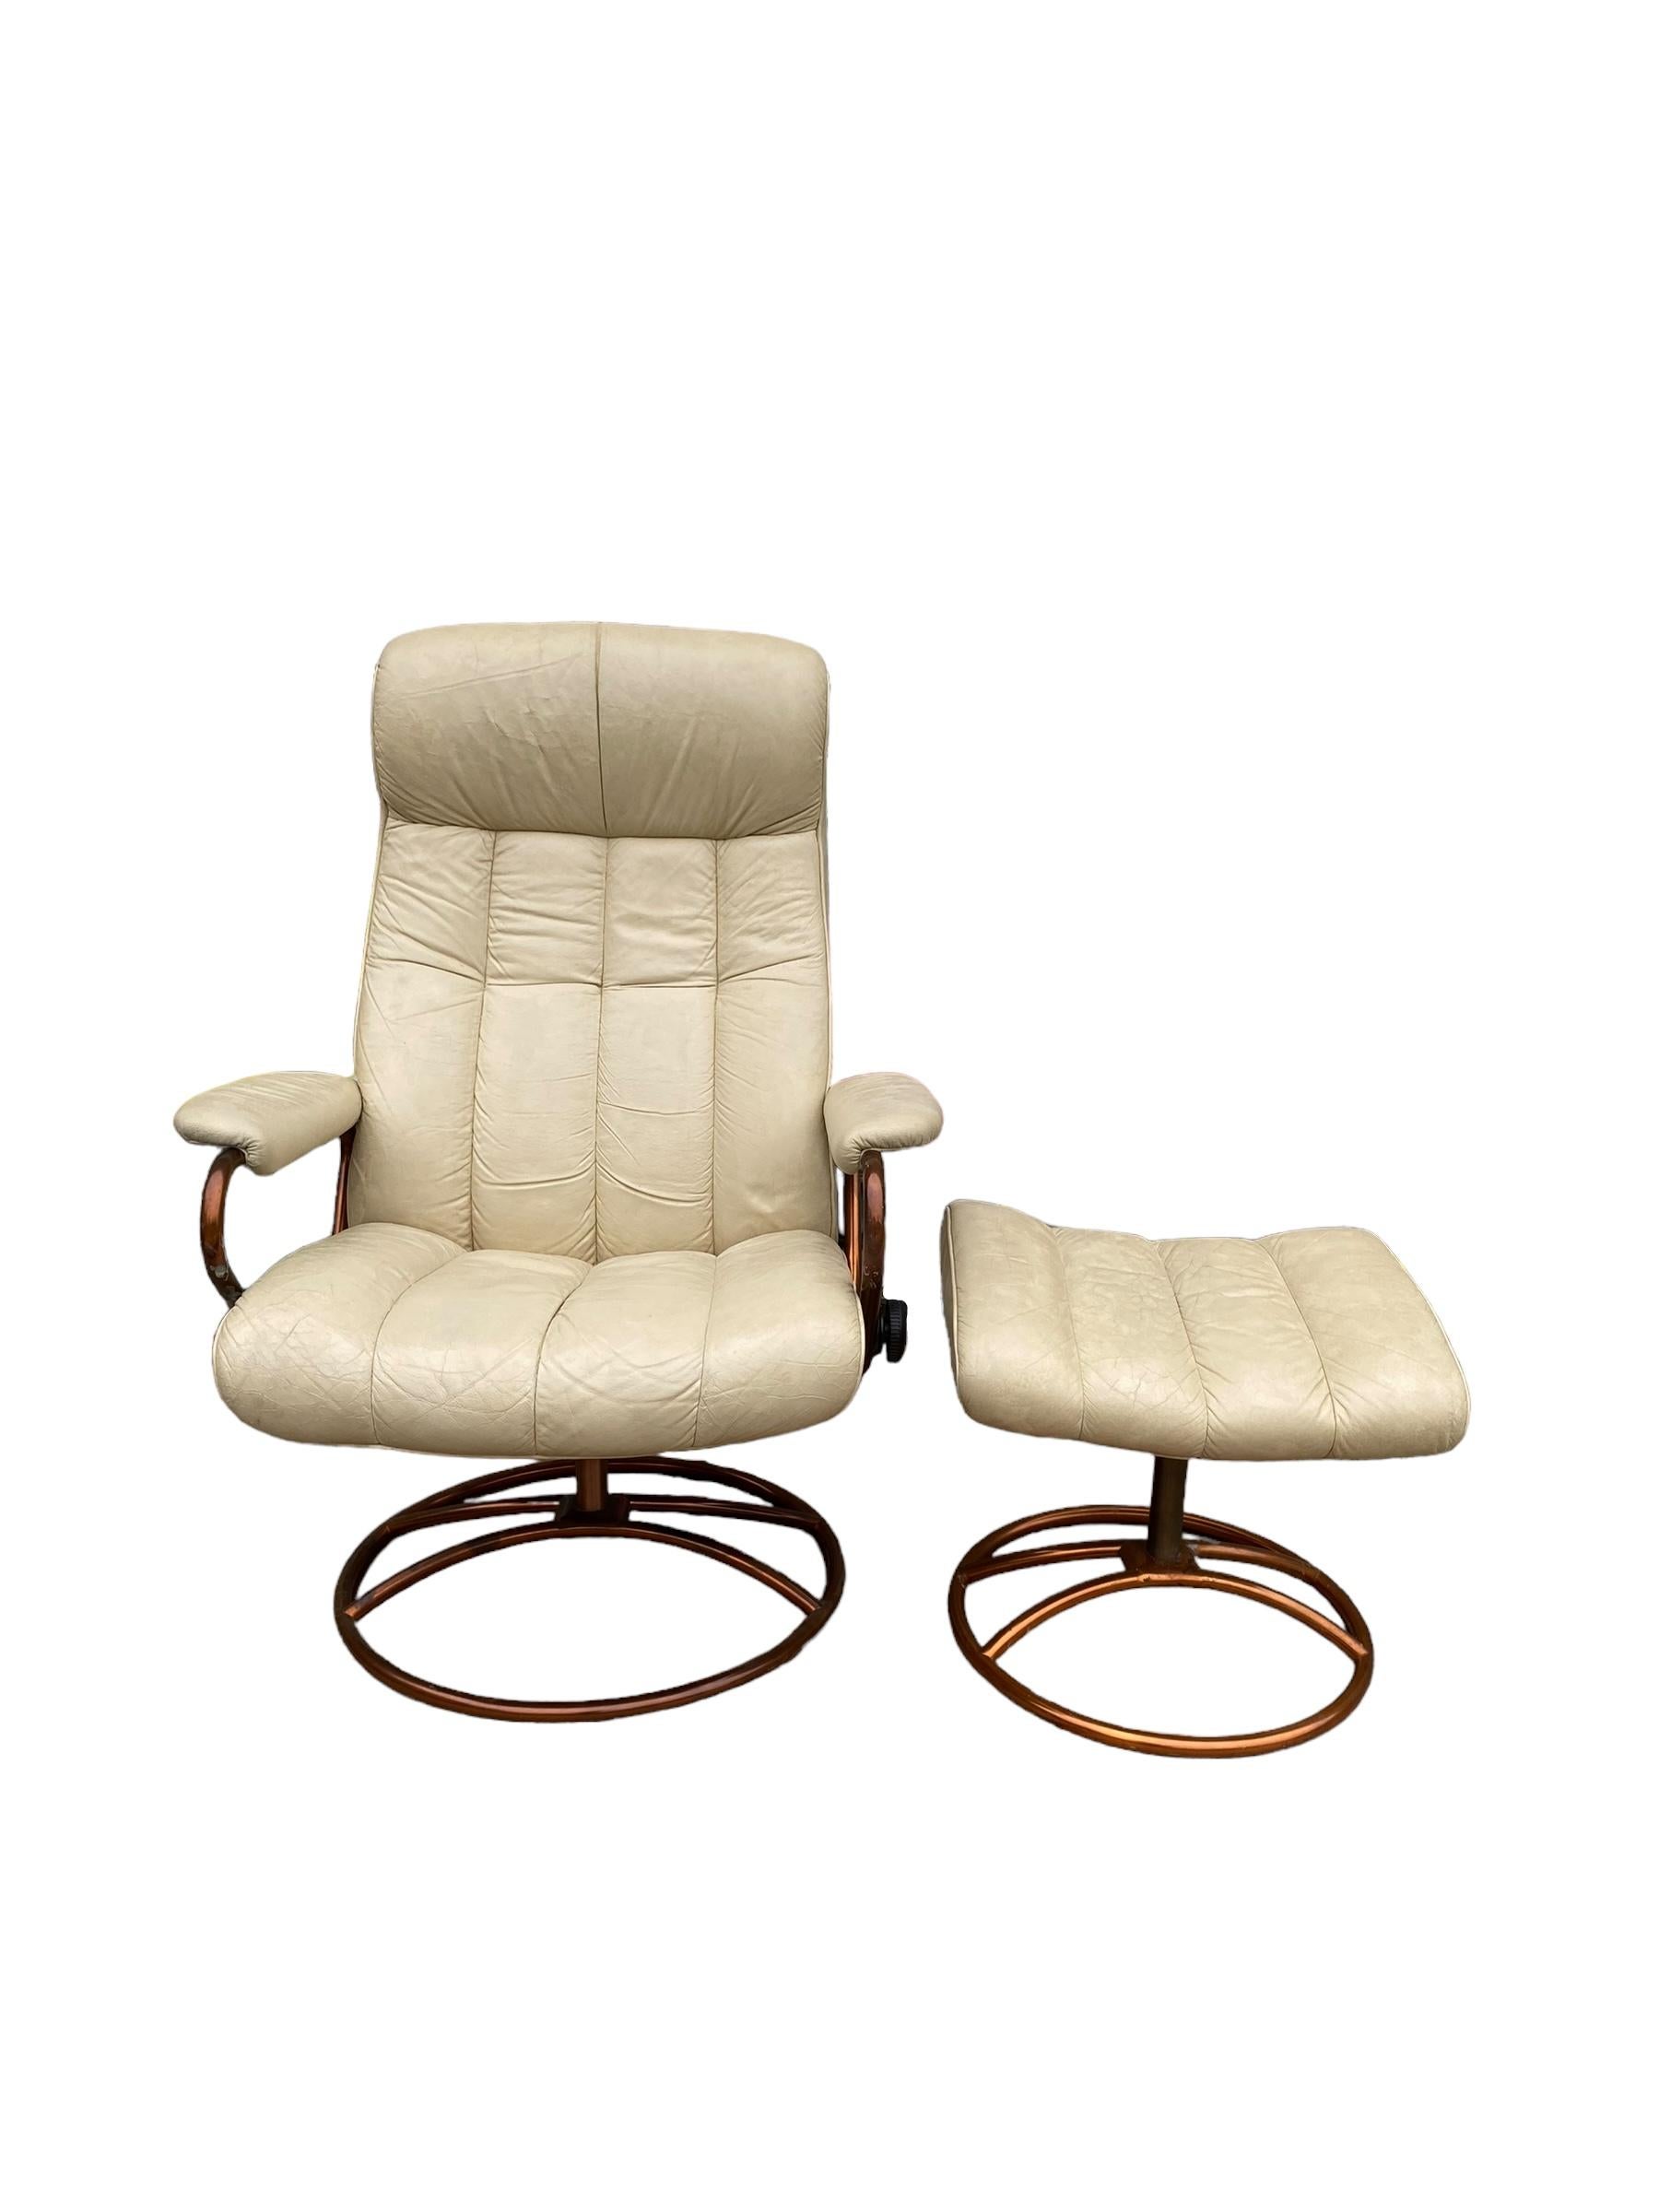 Post Modern Stressless Lounge Chair and Ottoman with copper frame For Sale 1